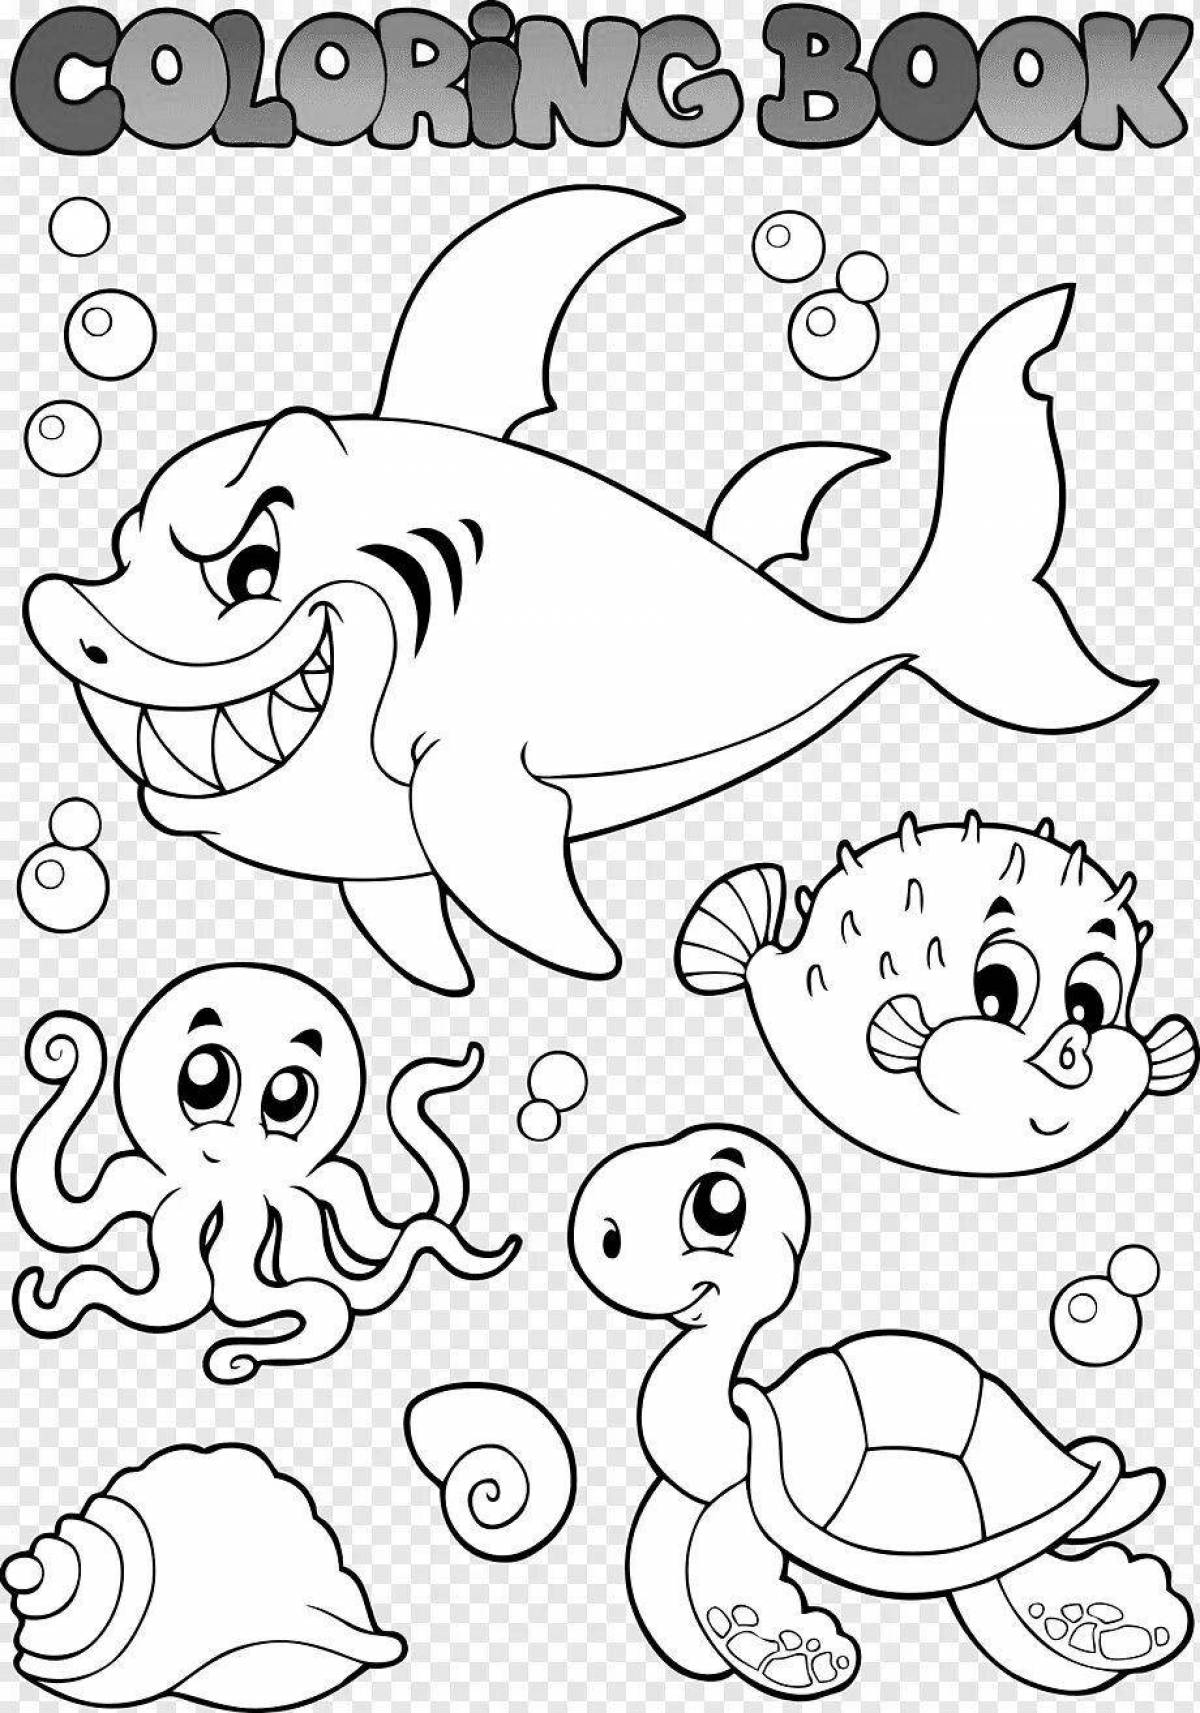 Gorgeous marine life coloring pages for kids